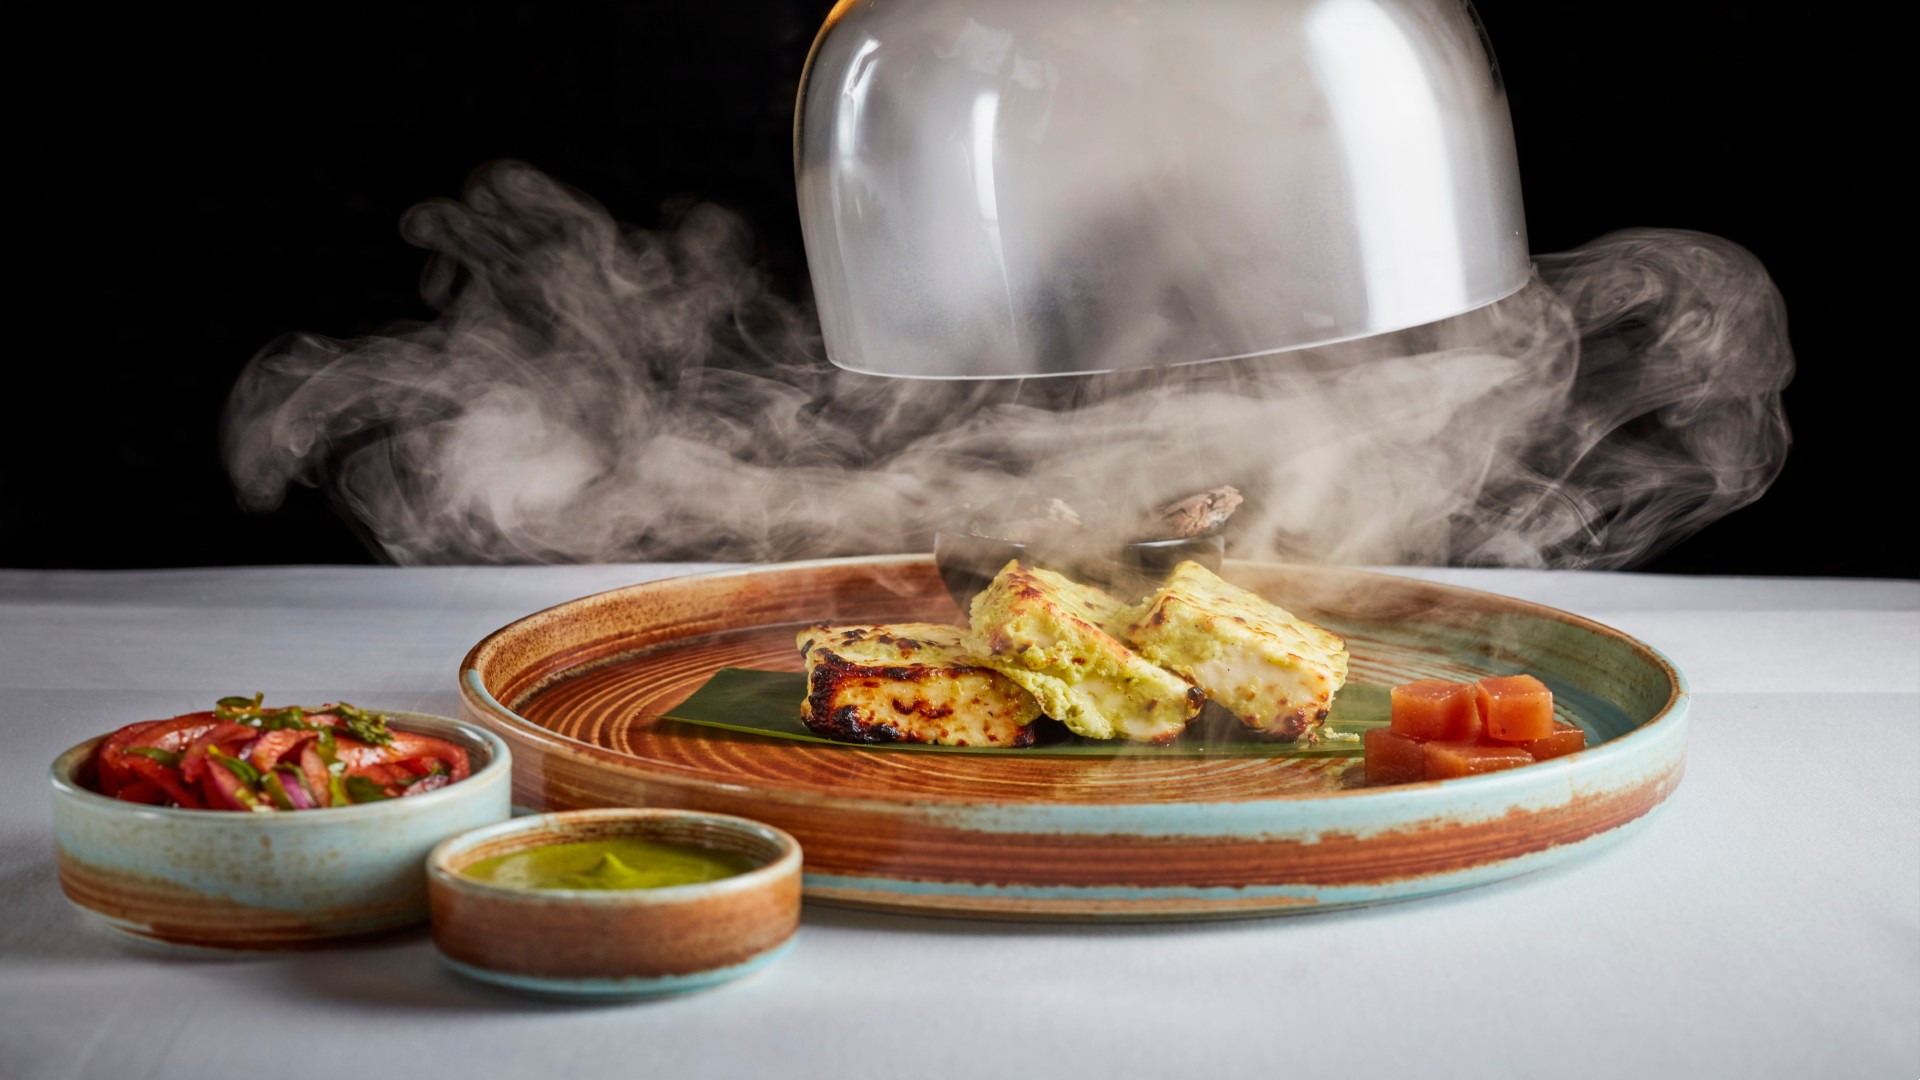 A cover is being lifted from a plate of food and steam billows out across the table.